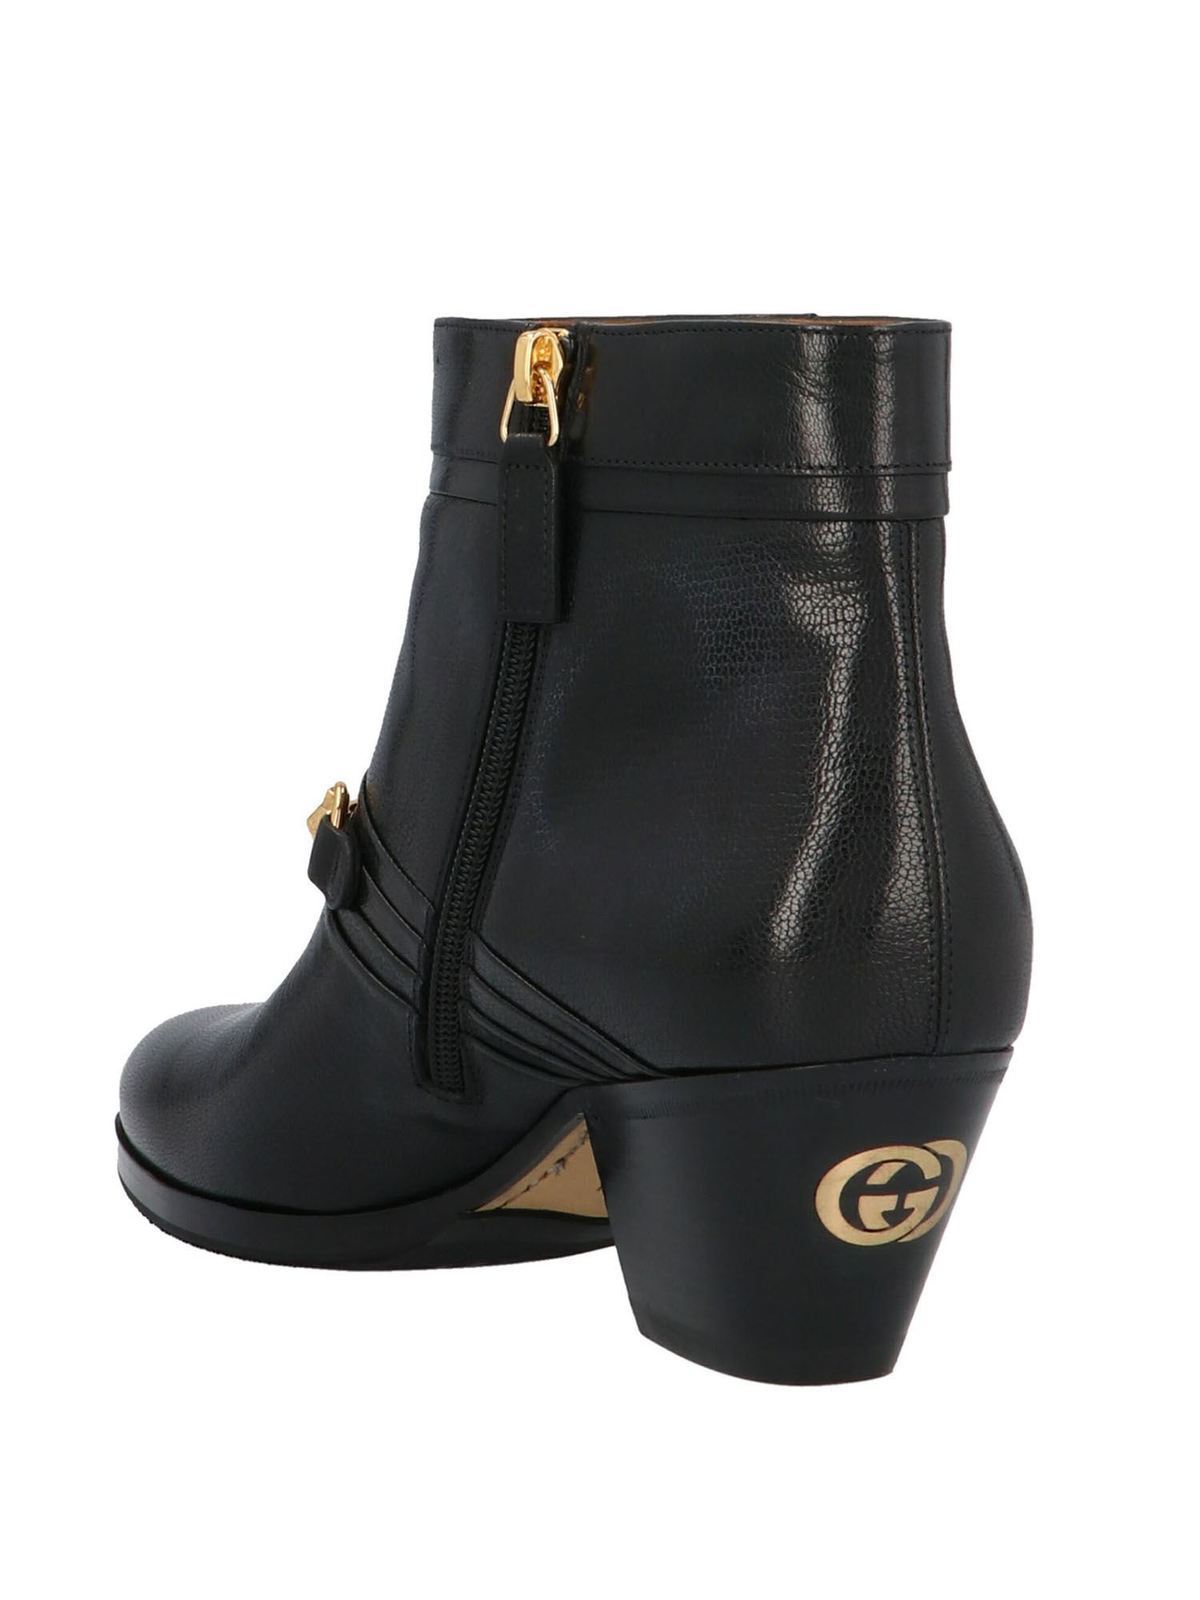 gucci black leather ankle boots